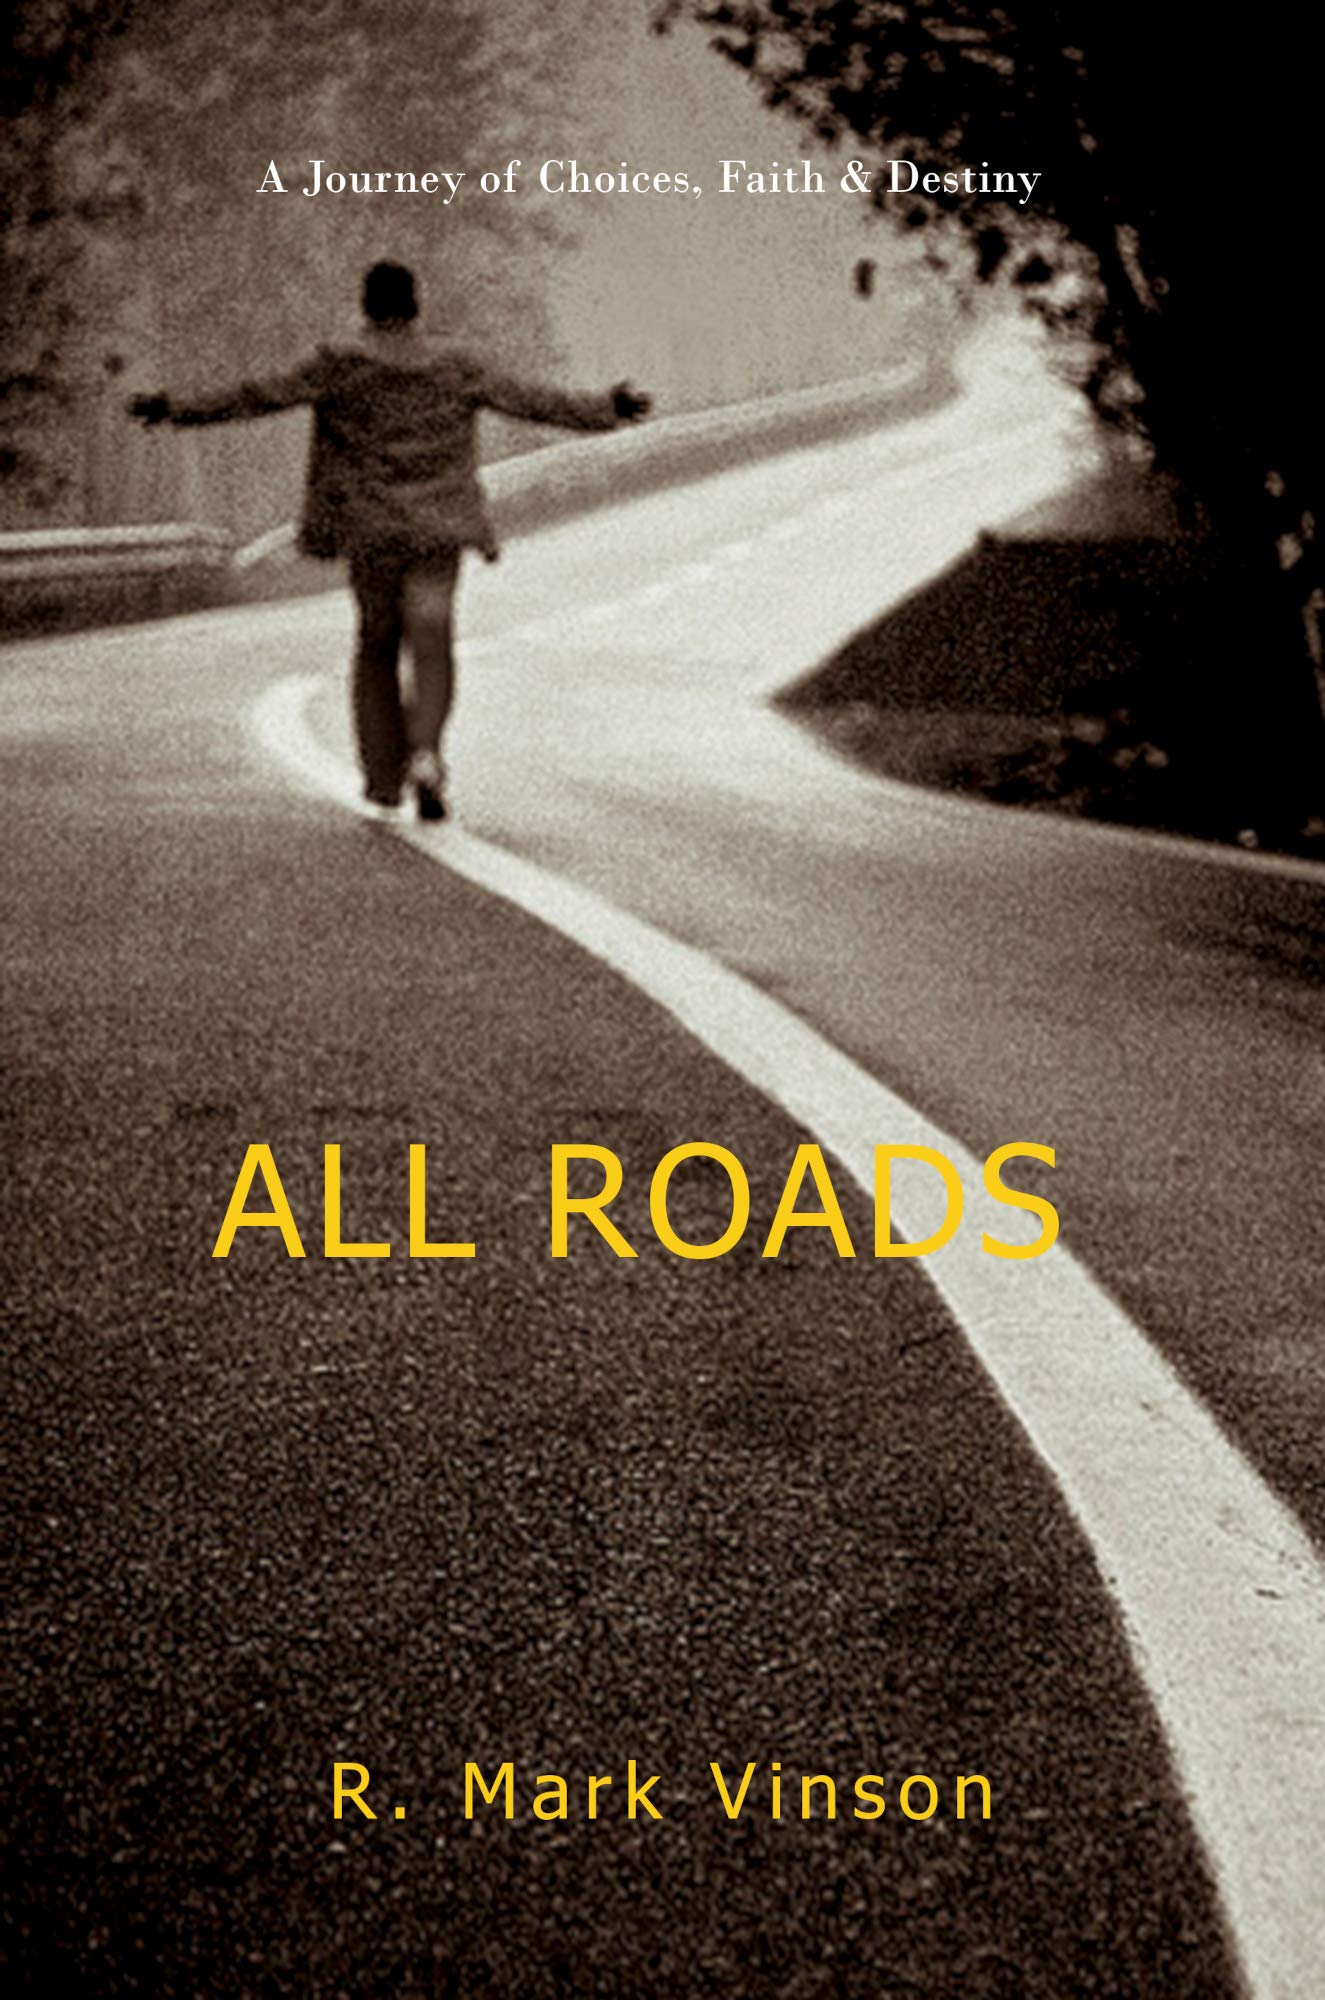 All Roads by R. Mark Vinson